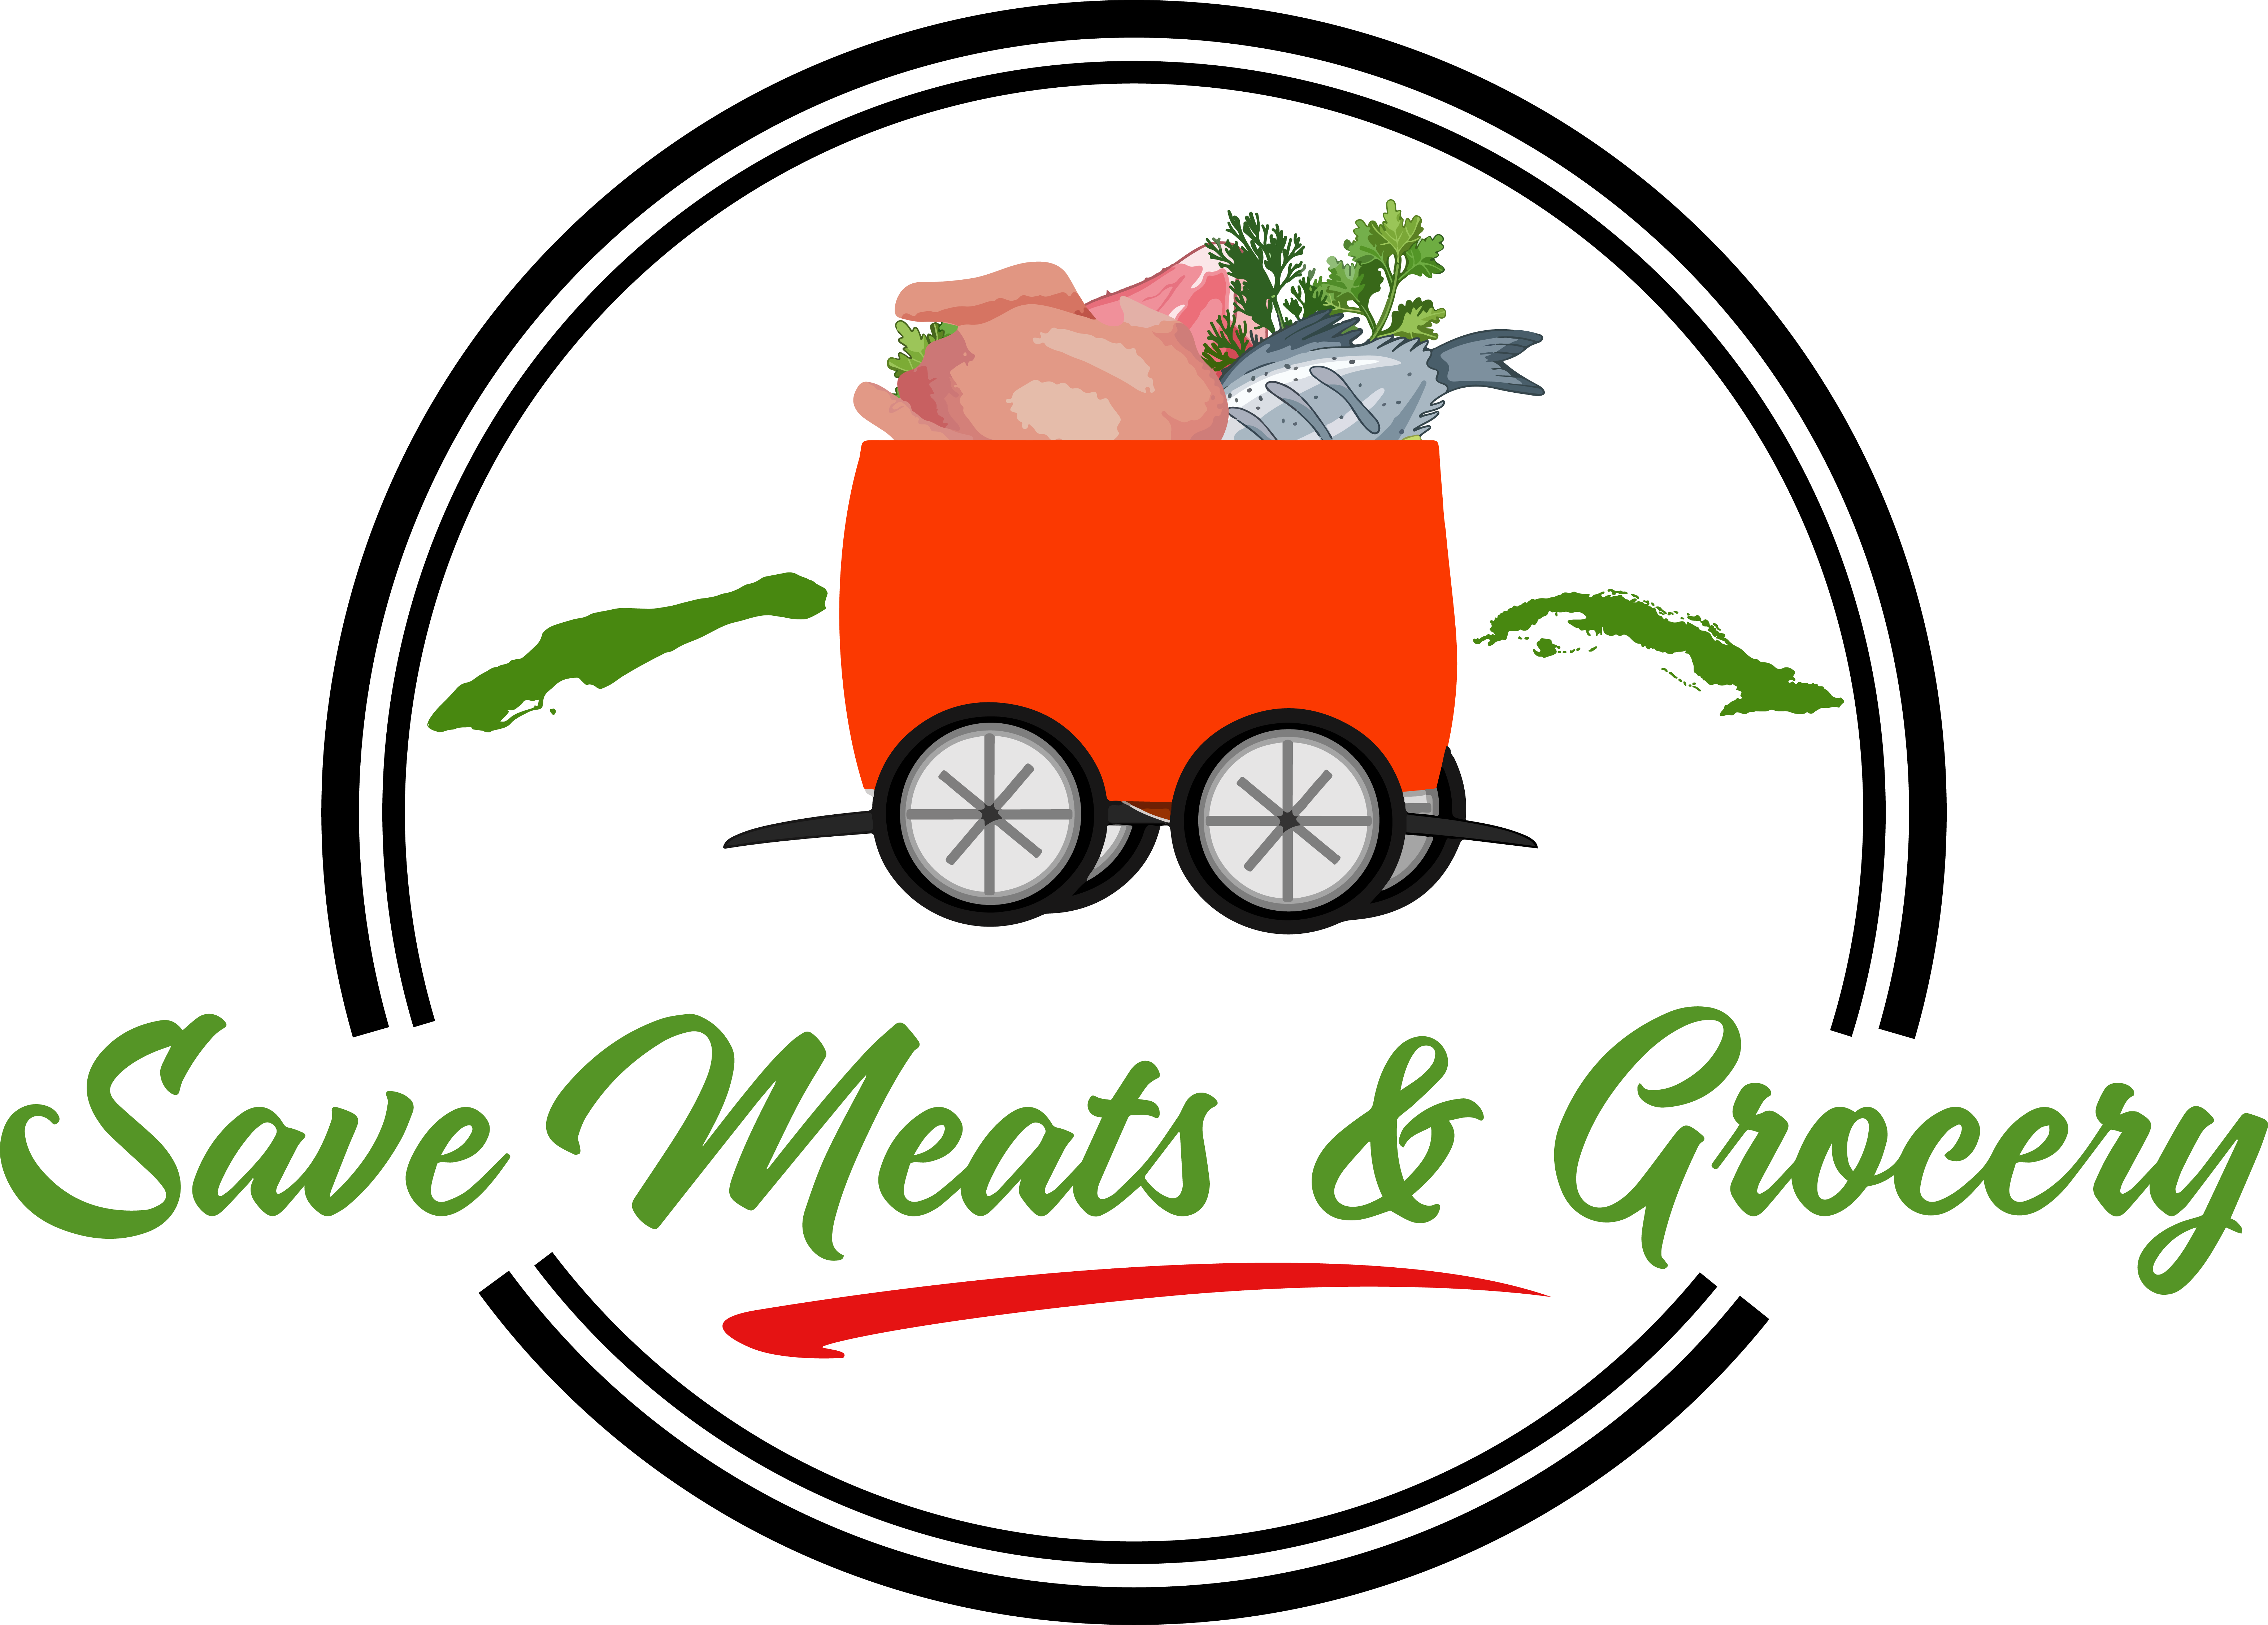 Your online grocery shopping store and delivery for Grand Cayman, Cayman Brac and Little Cayman, we serve all three Cayman Islands